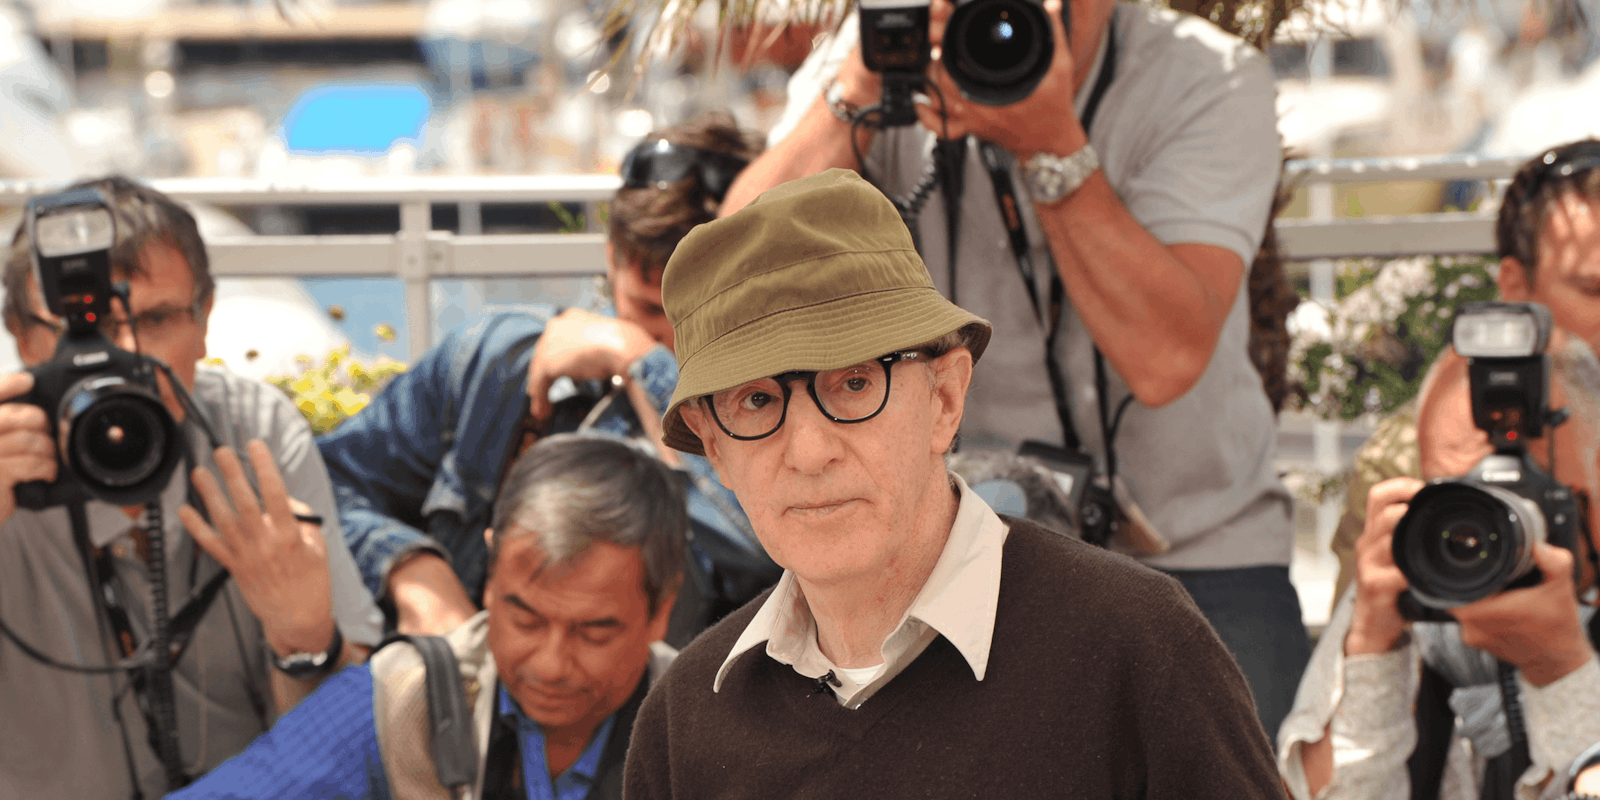 Woody Allen stated that he didn't want the Weinstein scandal to cause a 'witch hunt atmosphere'